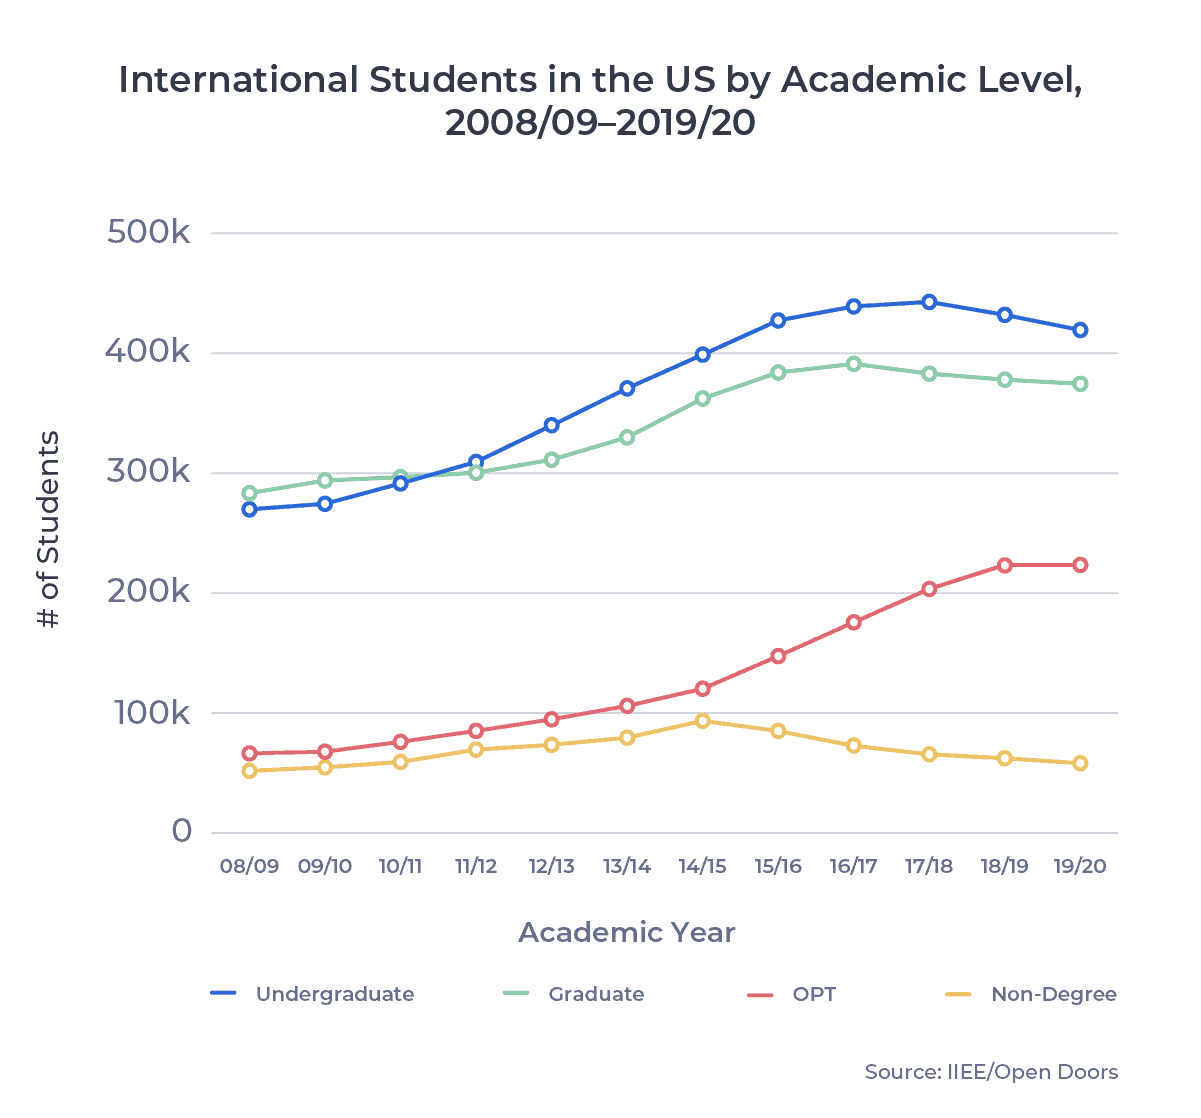 Line chart showing the change in the number of international students in the US by academic level from 08/09 to 19/20. Examined in detail below.